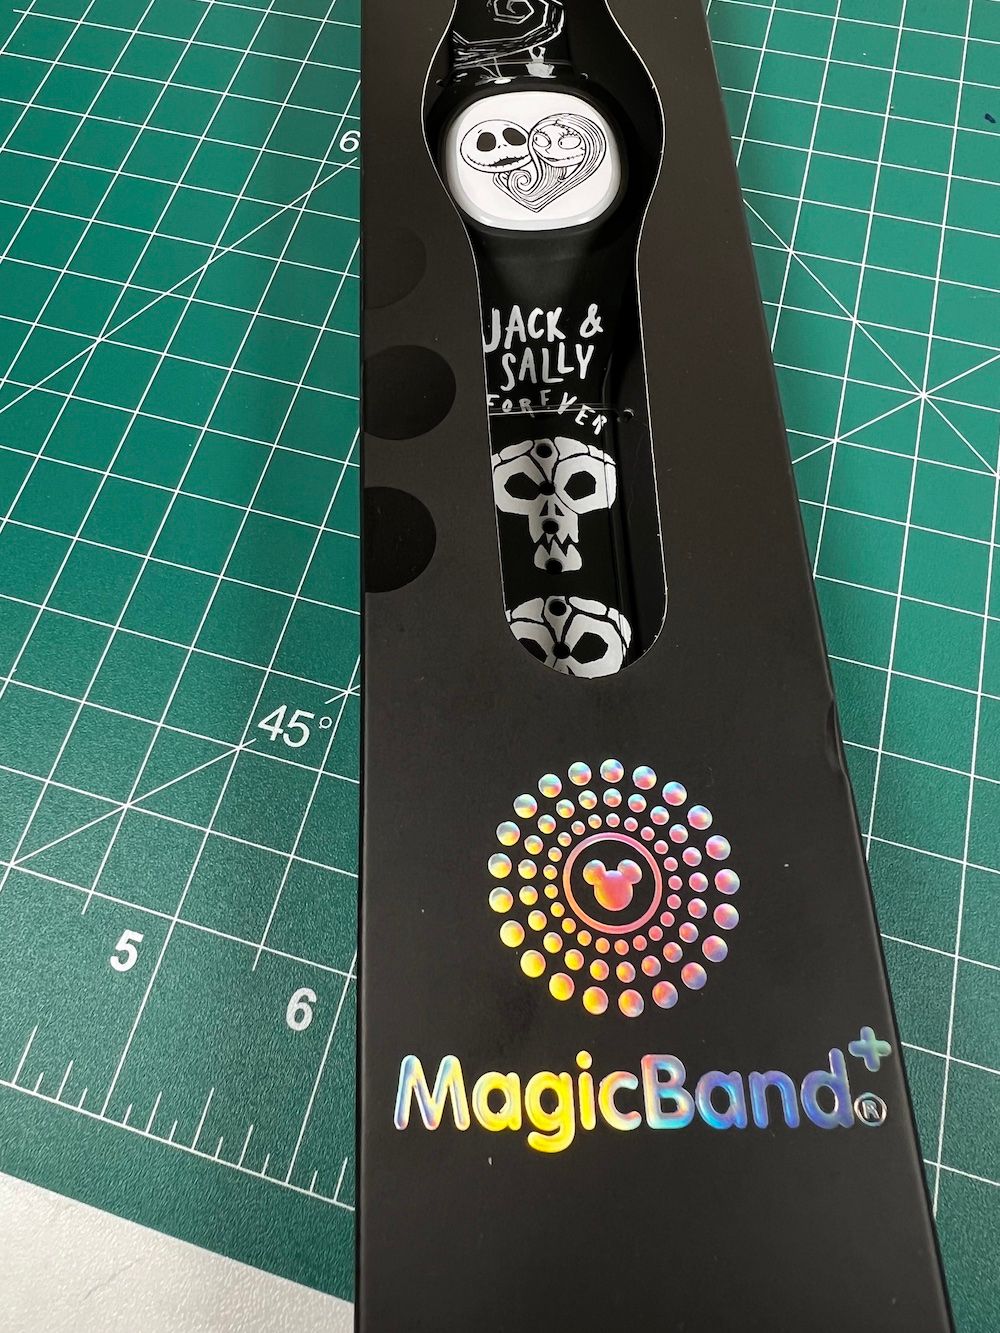 magicband plus review